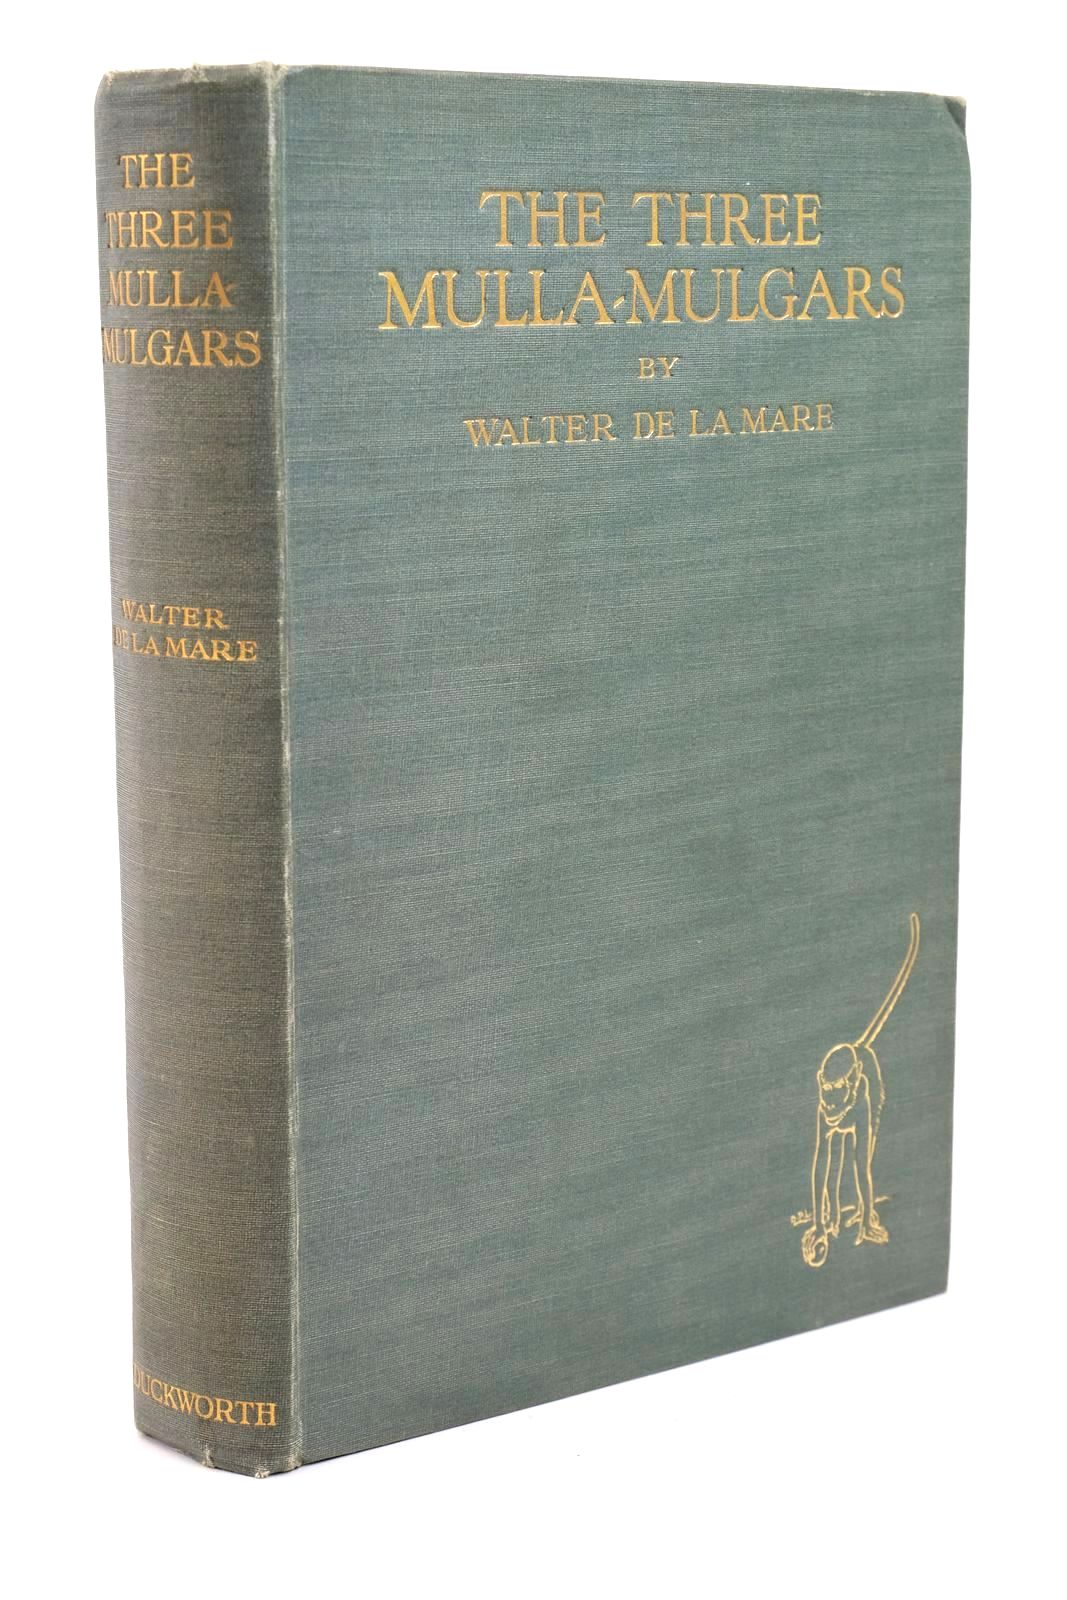 Photo of THE THREE MULLA-MULGARS written by De La Mare, Walter illustrated by Lathrop, Dorothy P. published by Duckworth & Co. (STOCK CODE: 1322978)  for sale by Stella & Rose's Books